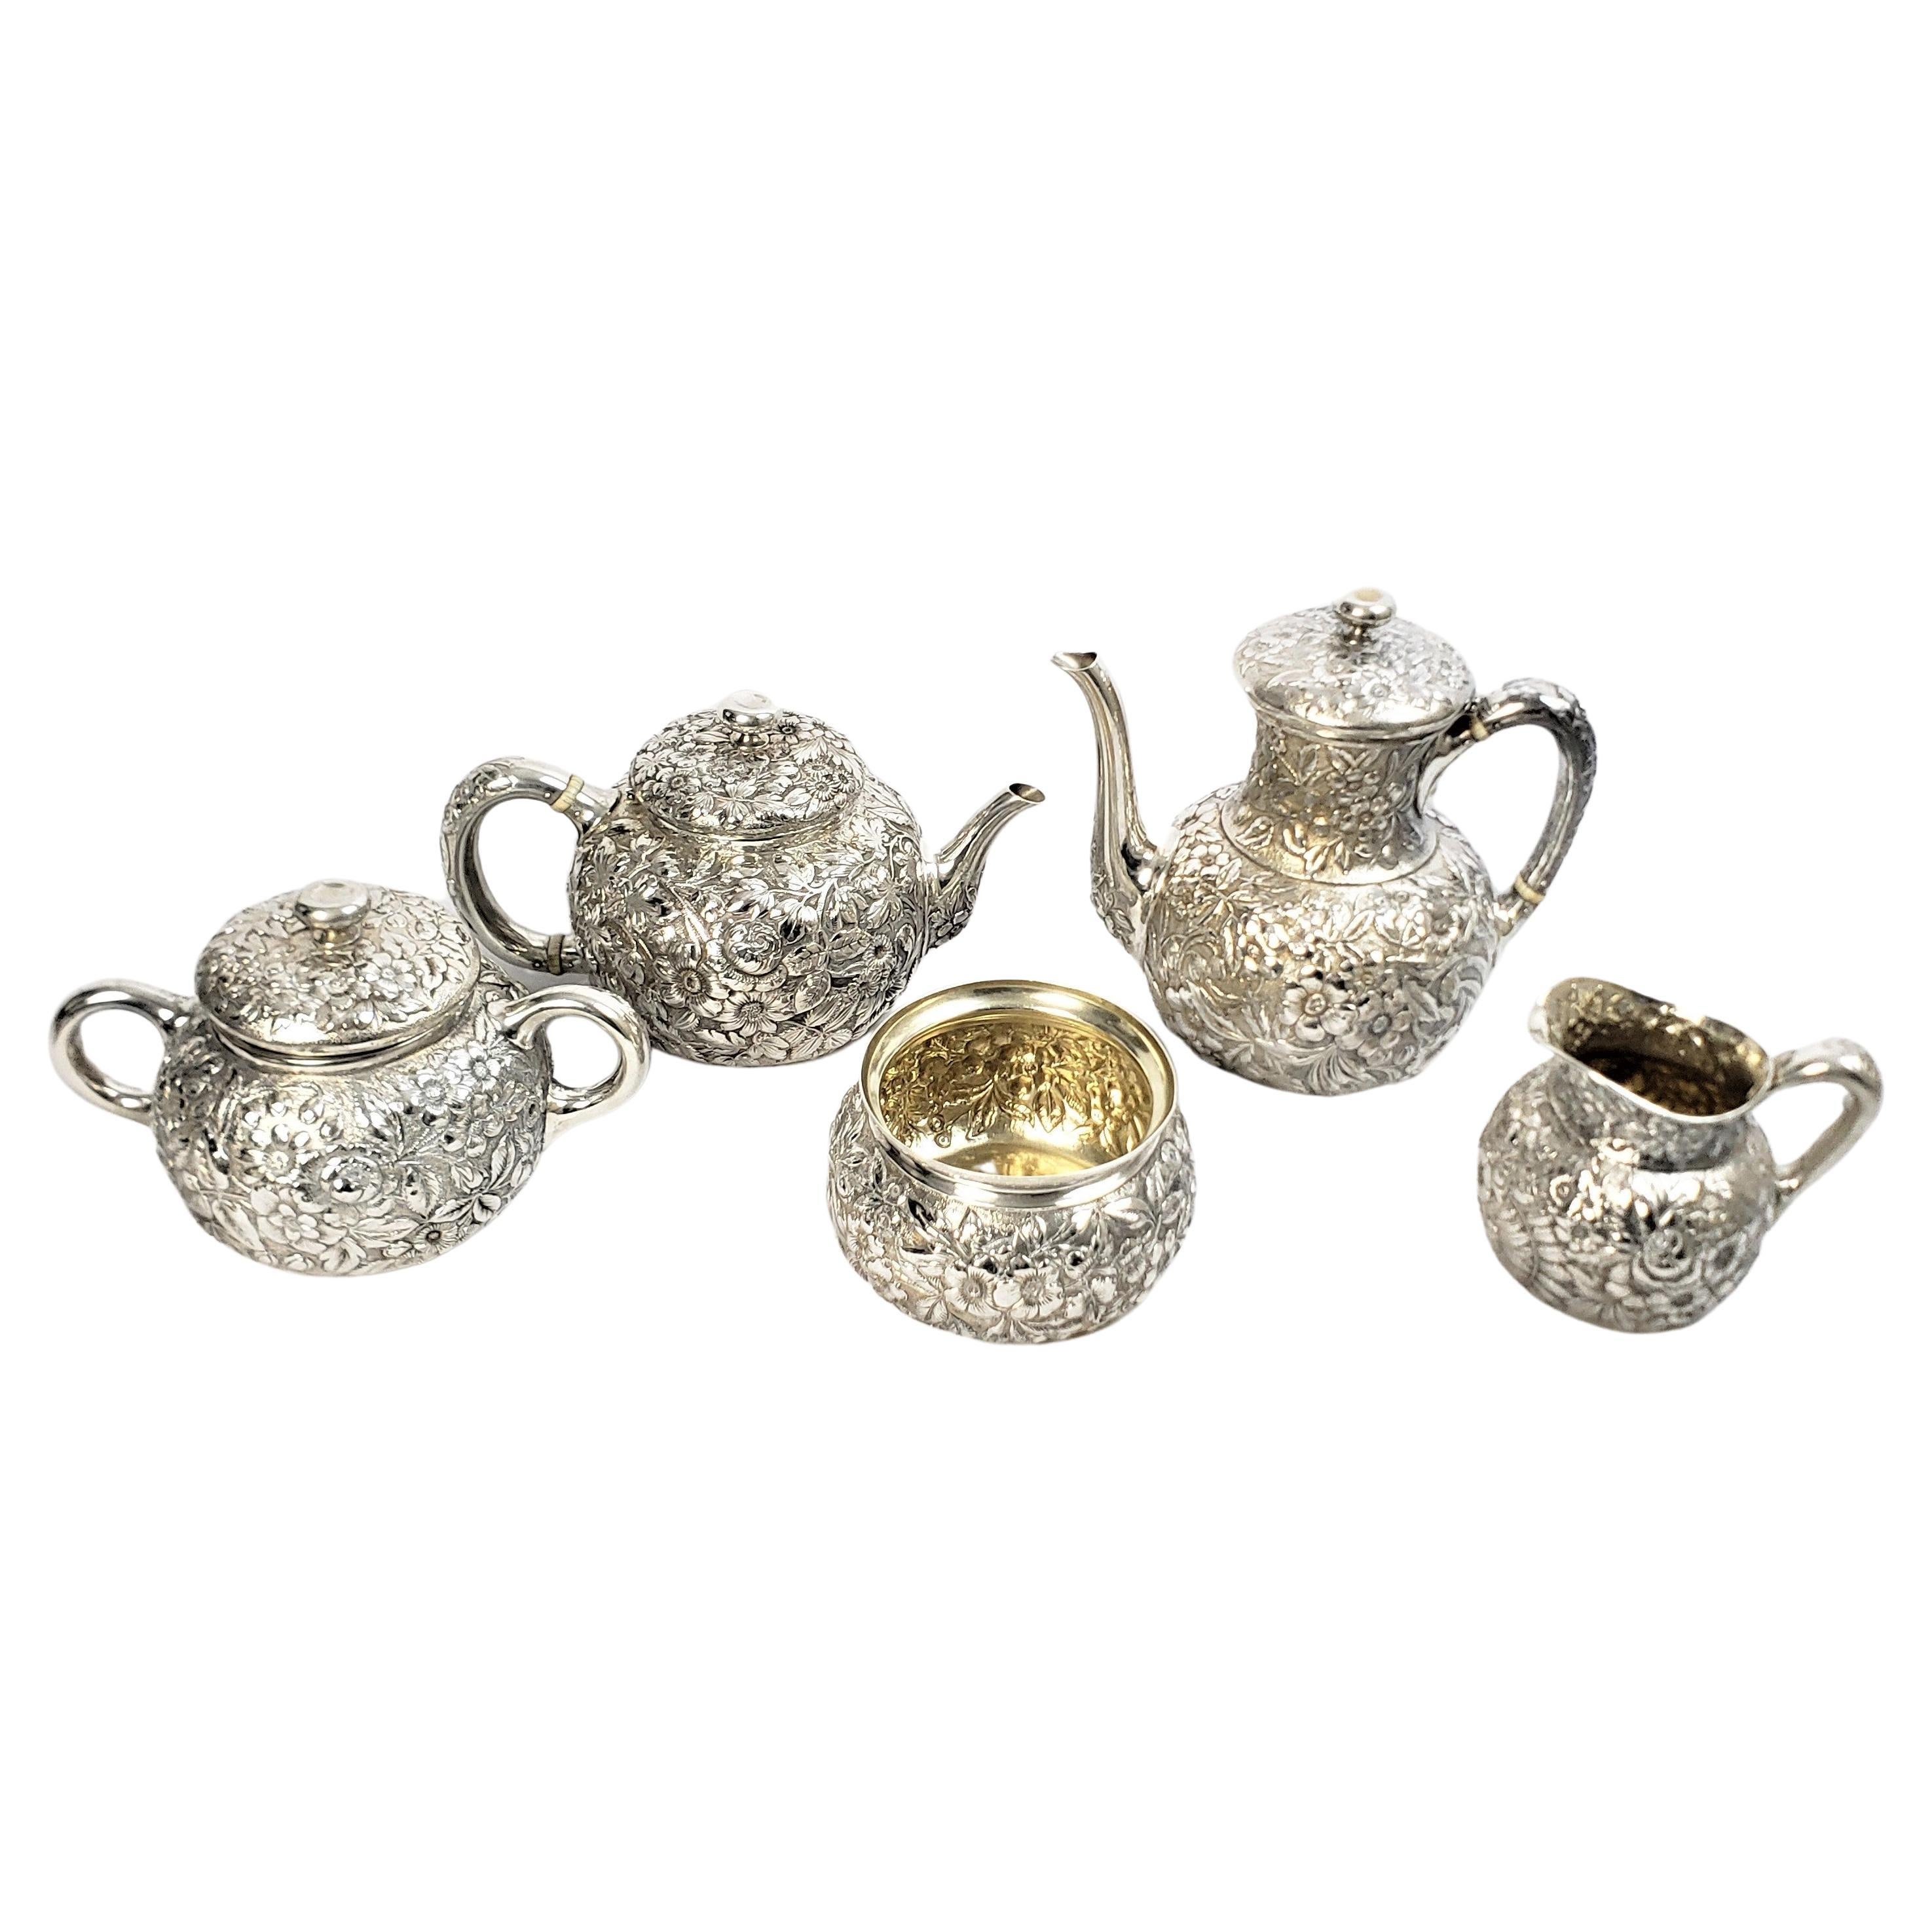 Antique Whiting 5 Piece "Repousse" Sterling Silver Tea Set with Floral Decor For Sale